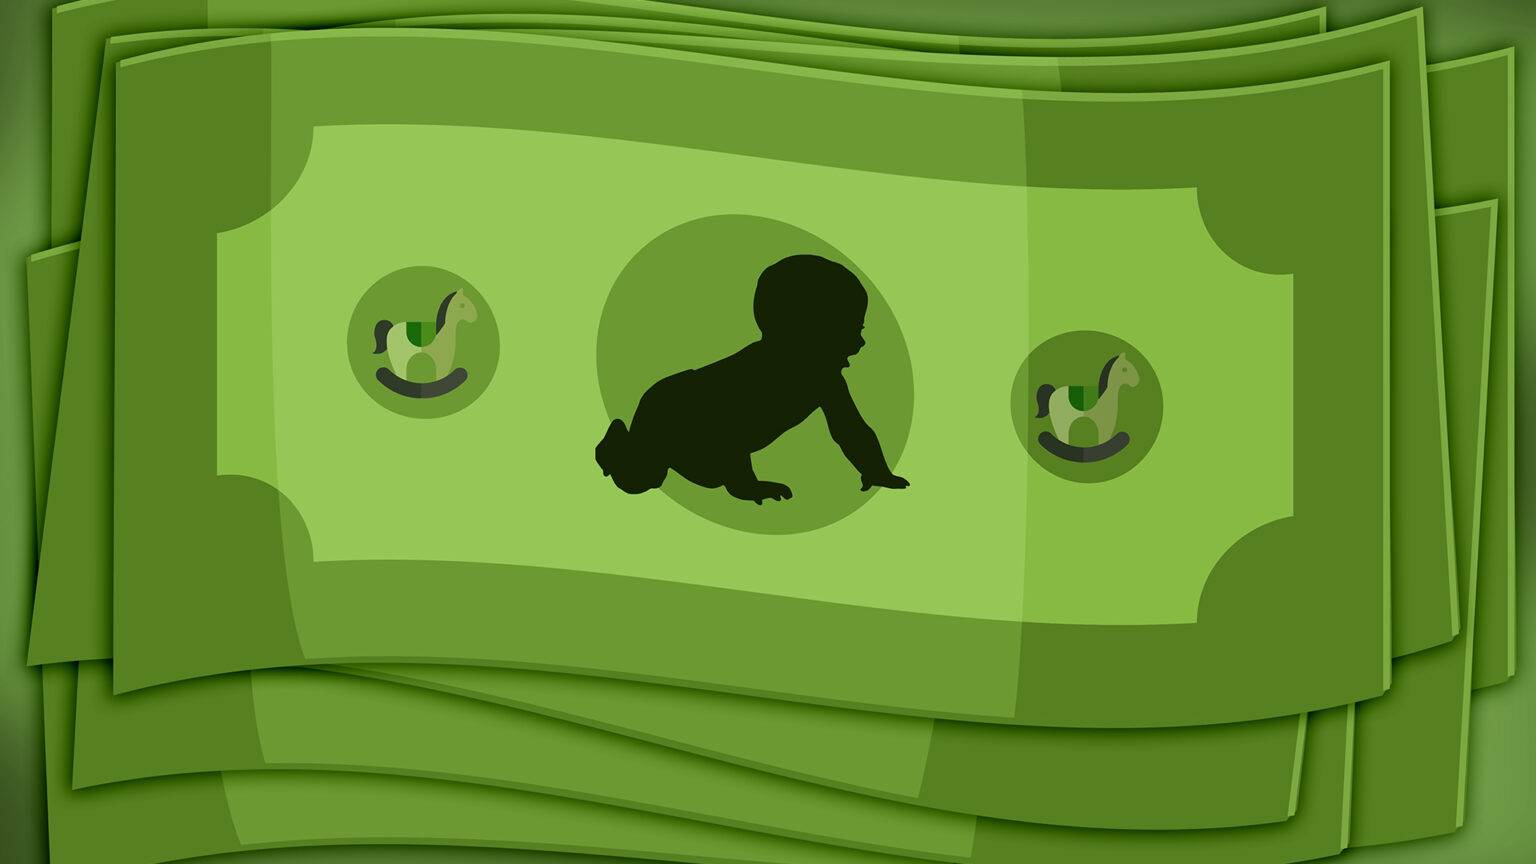 An illustration of cash shows a crawling baby as the portrait in the center and rocking horses on either side.